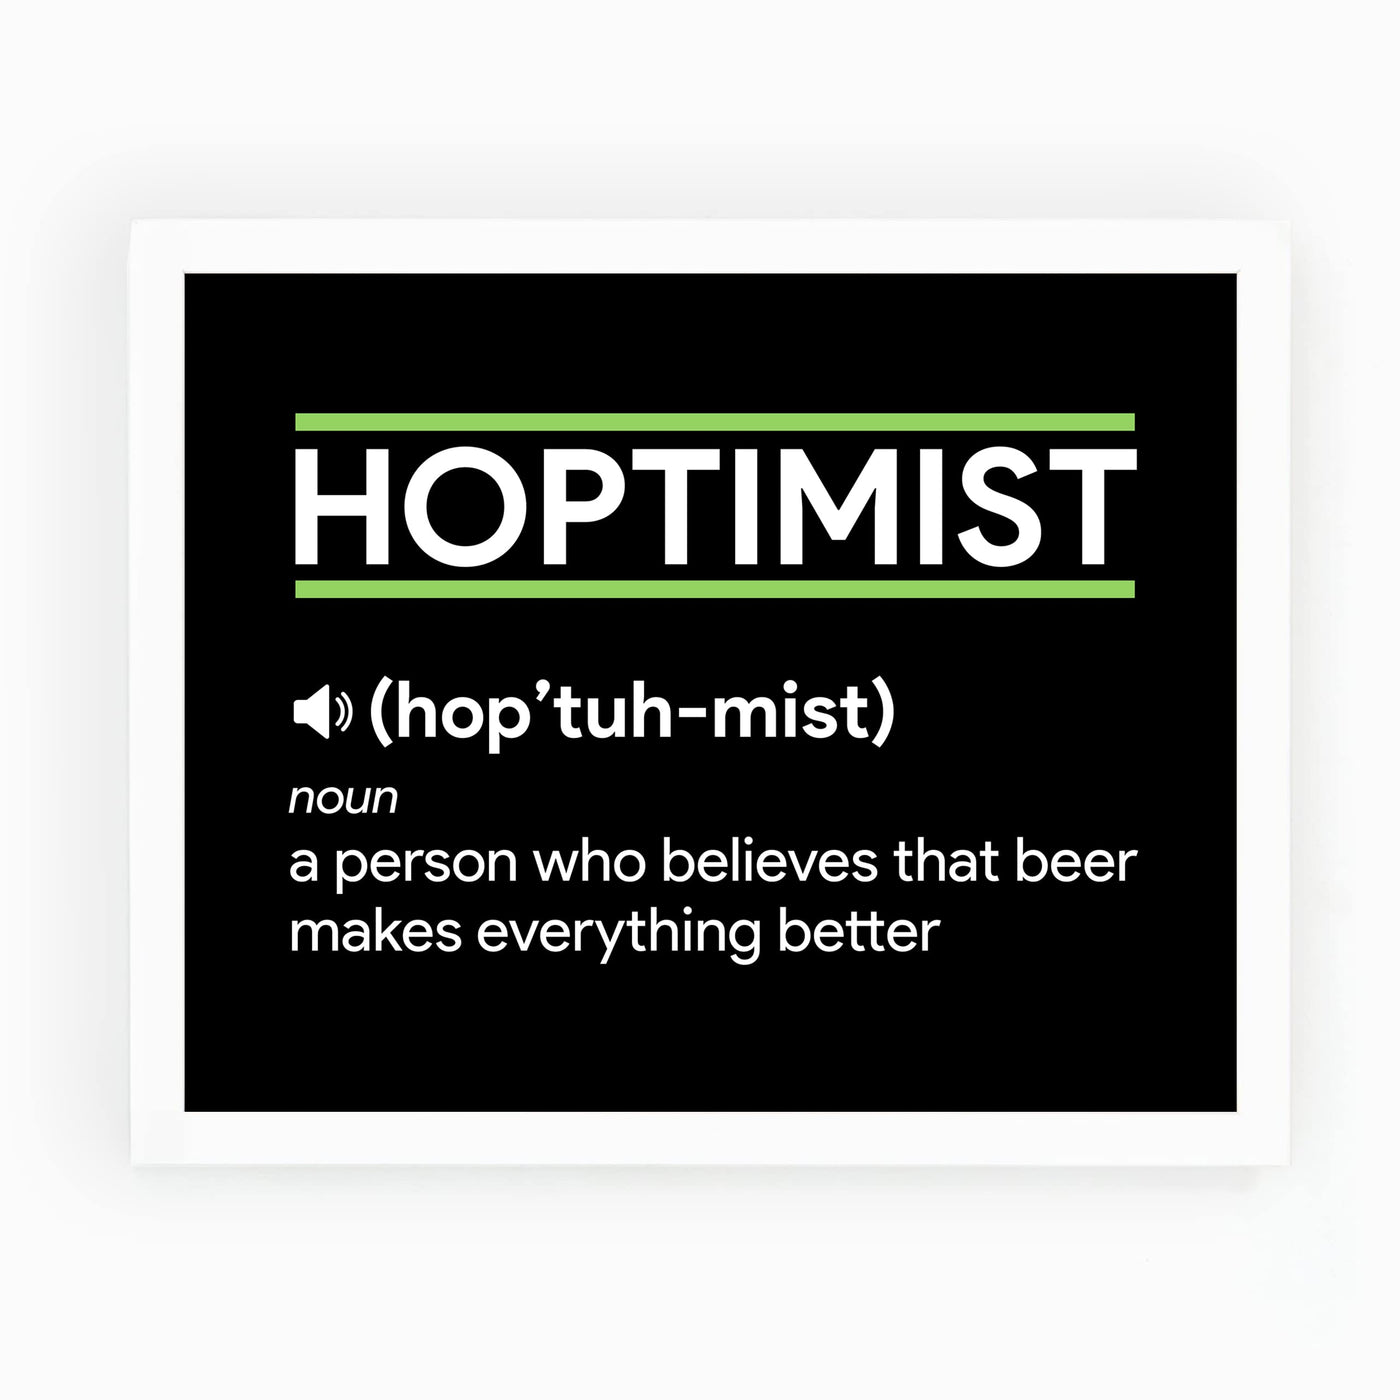 Hoptimist- Beer Makes Everything Better Funny Beer & Alcohol Wall Sign -10 x 8" Rustic Bar Wall Art Print -Ready to Frame. Humorous Decoration for Home-Office-Man Cave-Garage-Shop-Pub. Fun Gift!